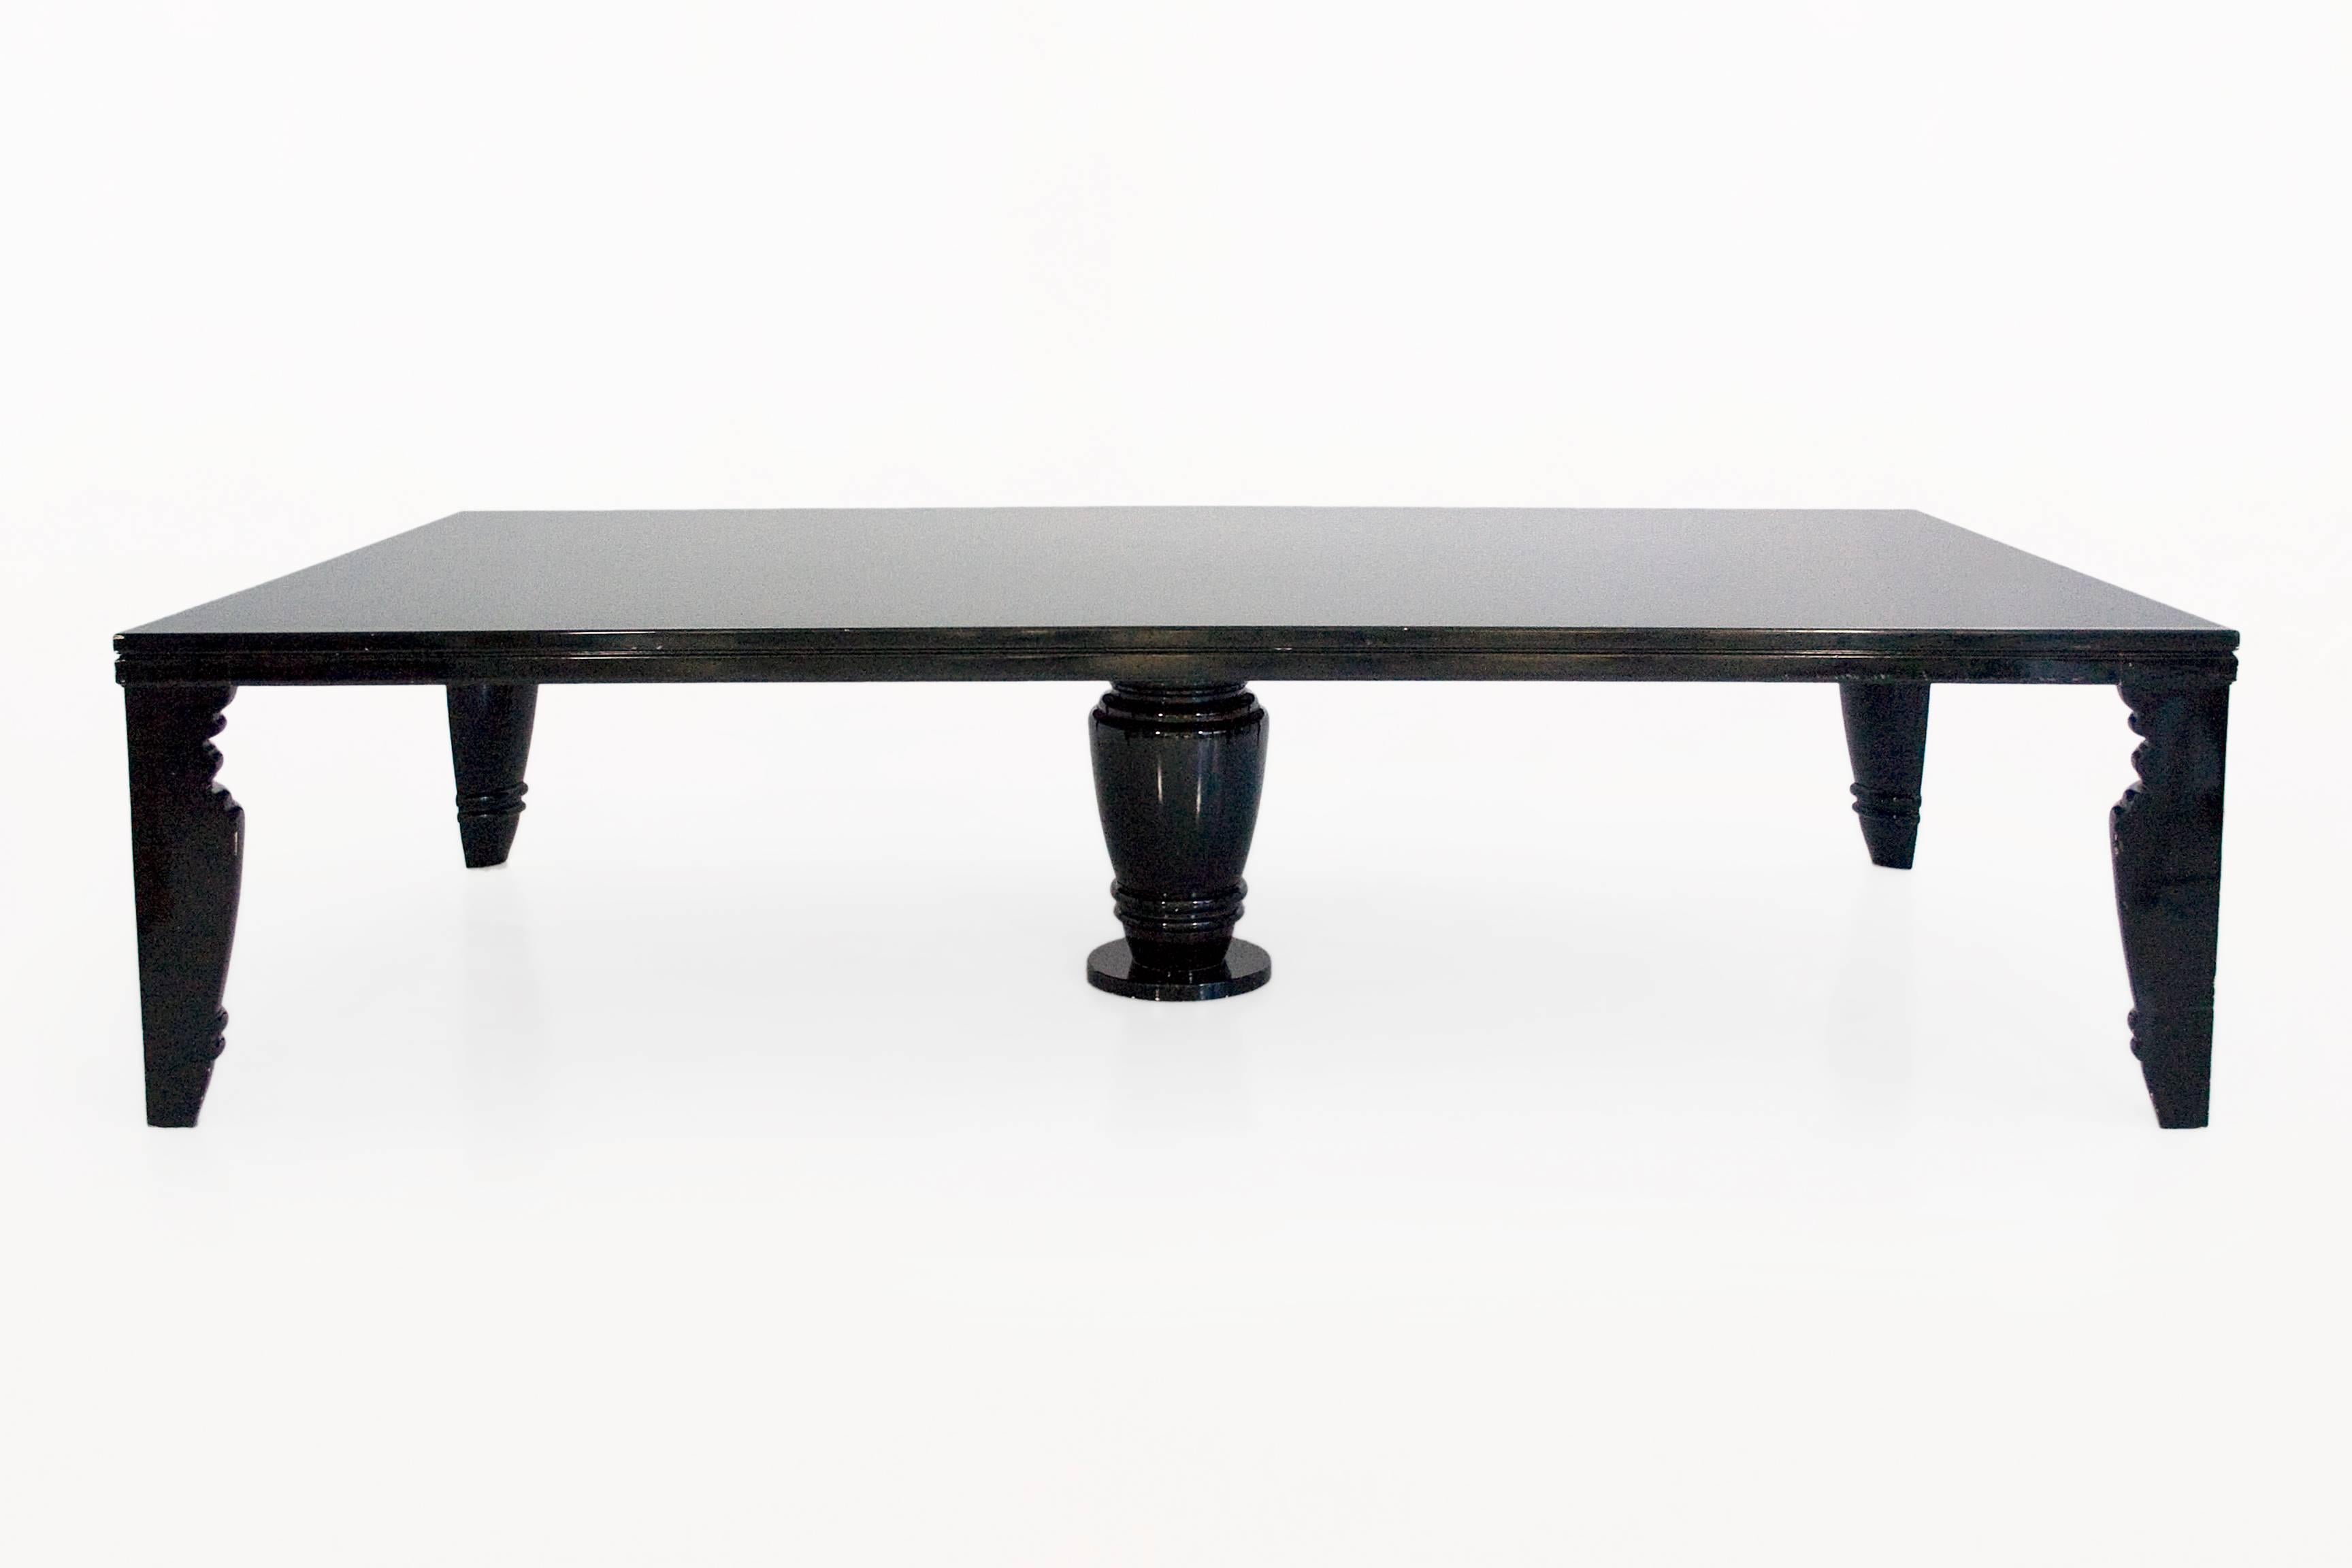 Exceptional, extra large black lacquered table
Table with a central leg
circa 1980, France
Very good vintage condition.